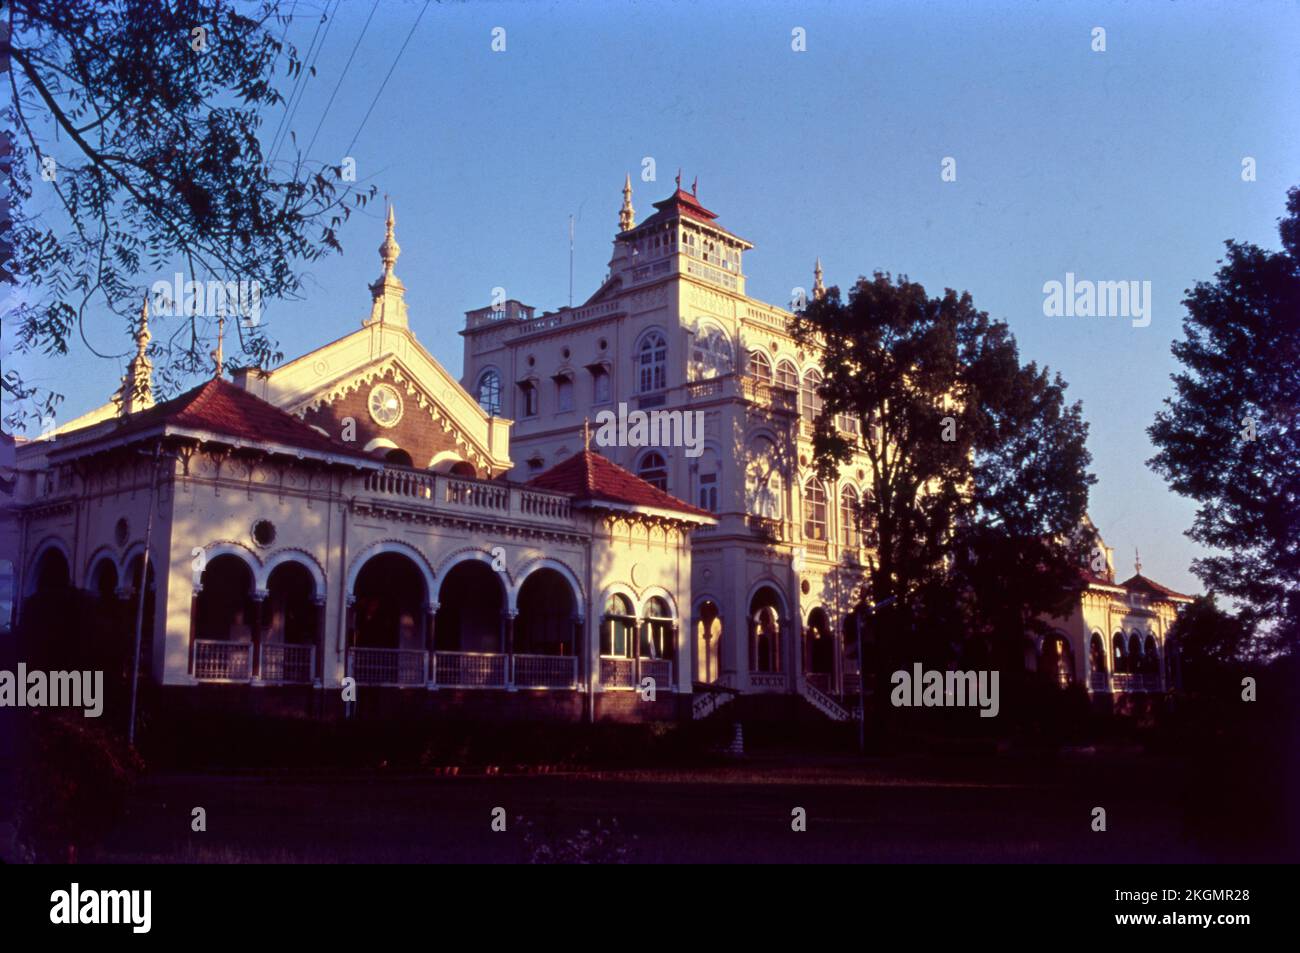 The Aga Khan Palace was built by Sultan Muhammed Shah Aga Khan III in the city of Pune, India. The palace was an act of charity by the spiritual leader of the Nizari Ismaili Muslims, who wanted to help the poor in the neighbouring areas of Pune Stock Photo